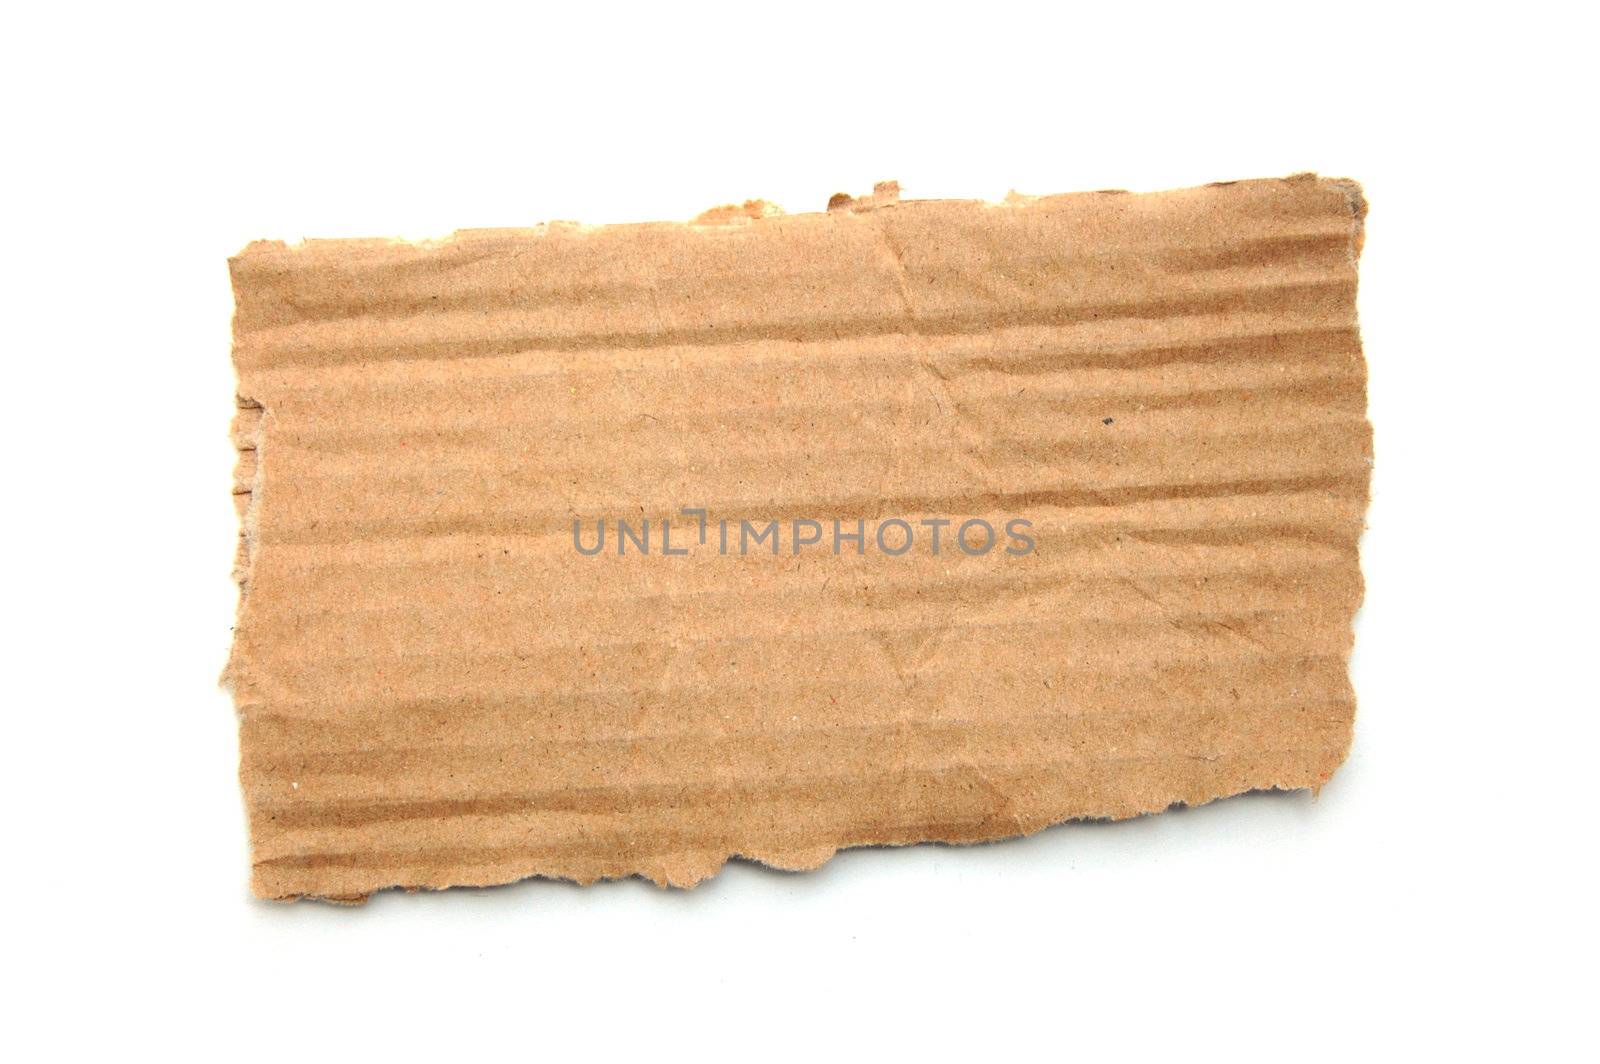 empty cardboard for a text message isolated on white background